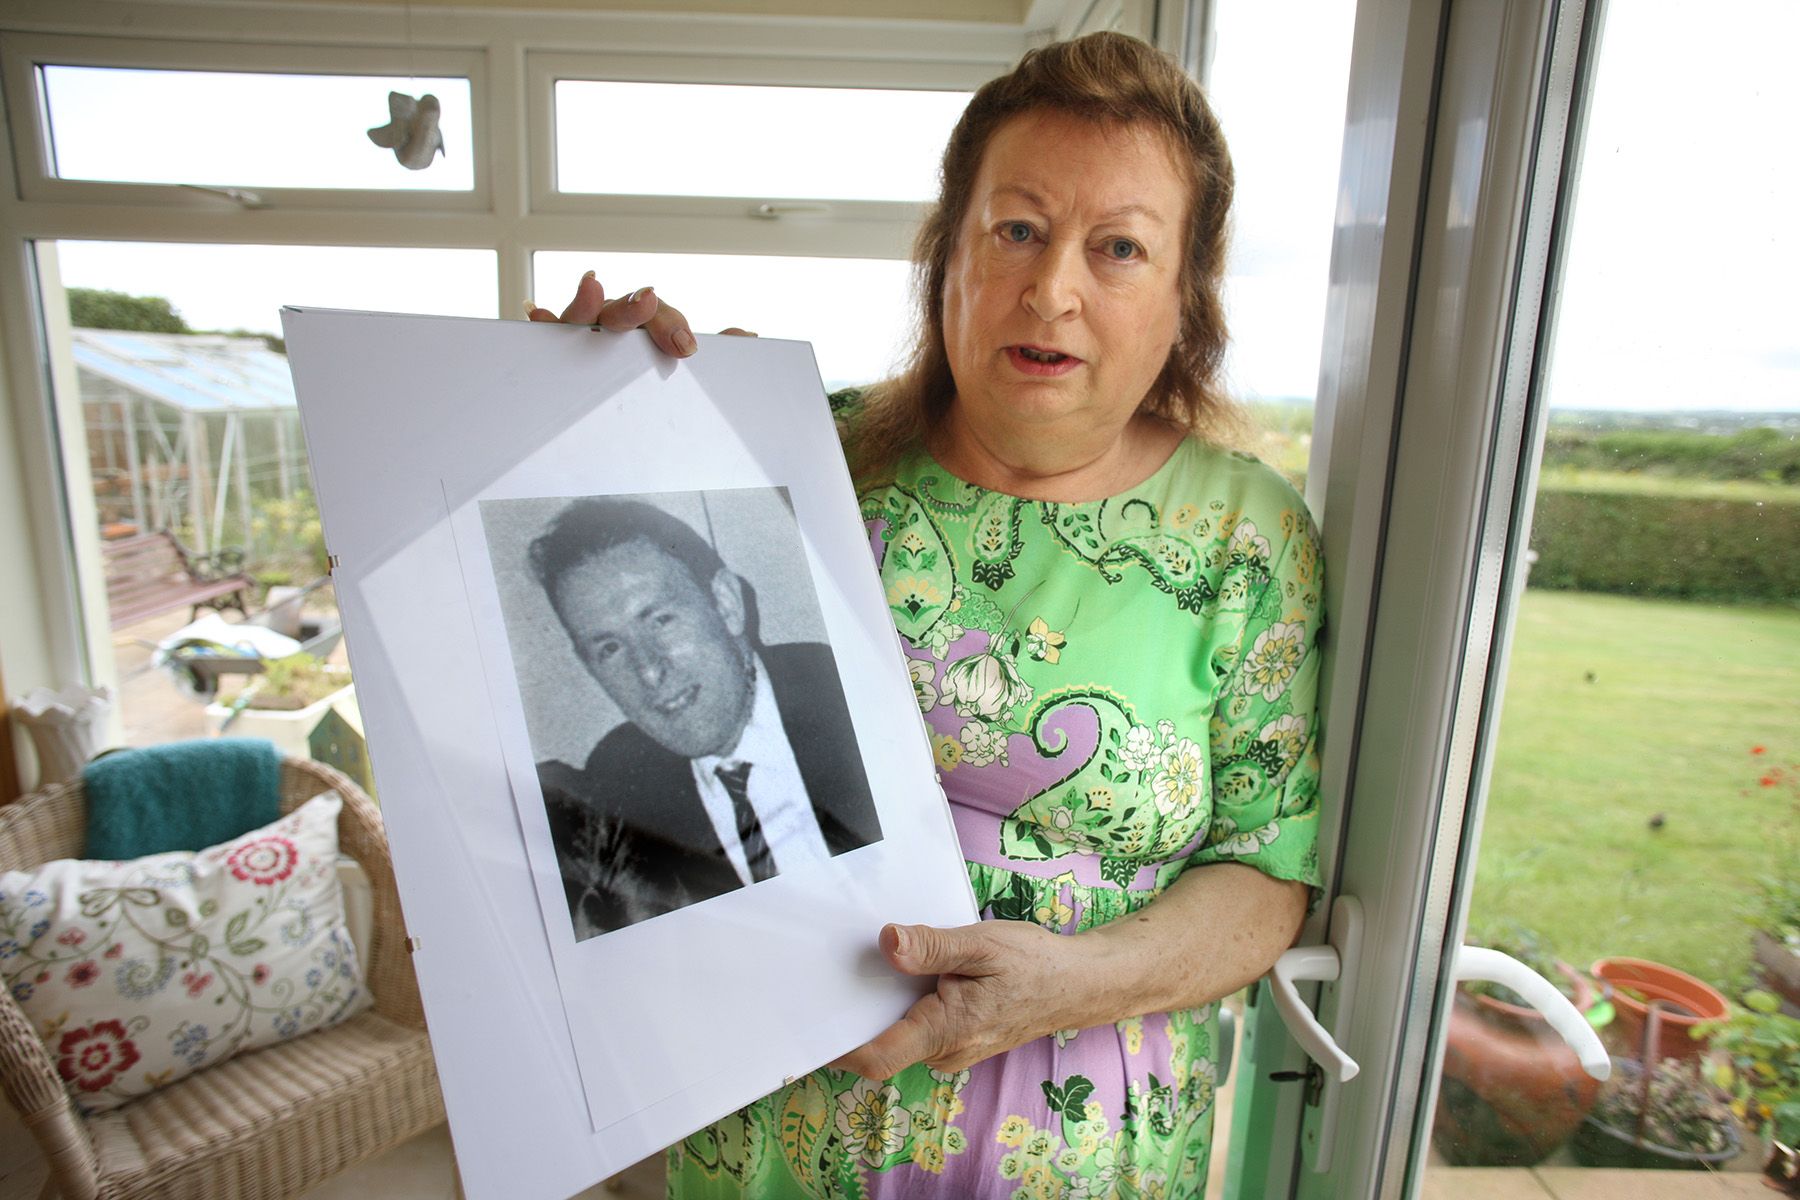 FIGHT FOR JUSTICE: Patricia McVeigh holds a photograph of her father Patrick